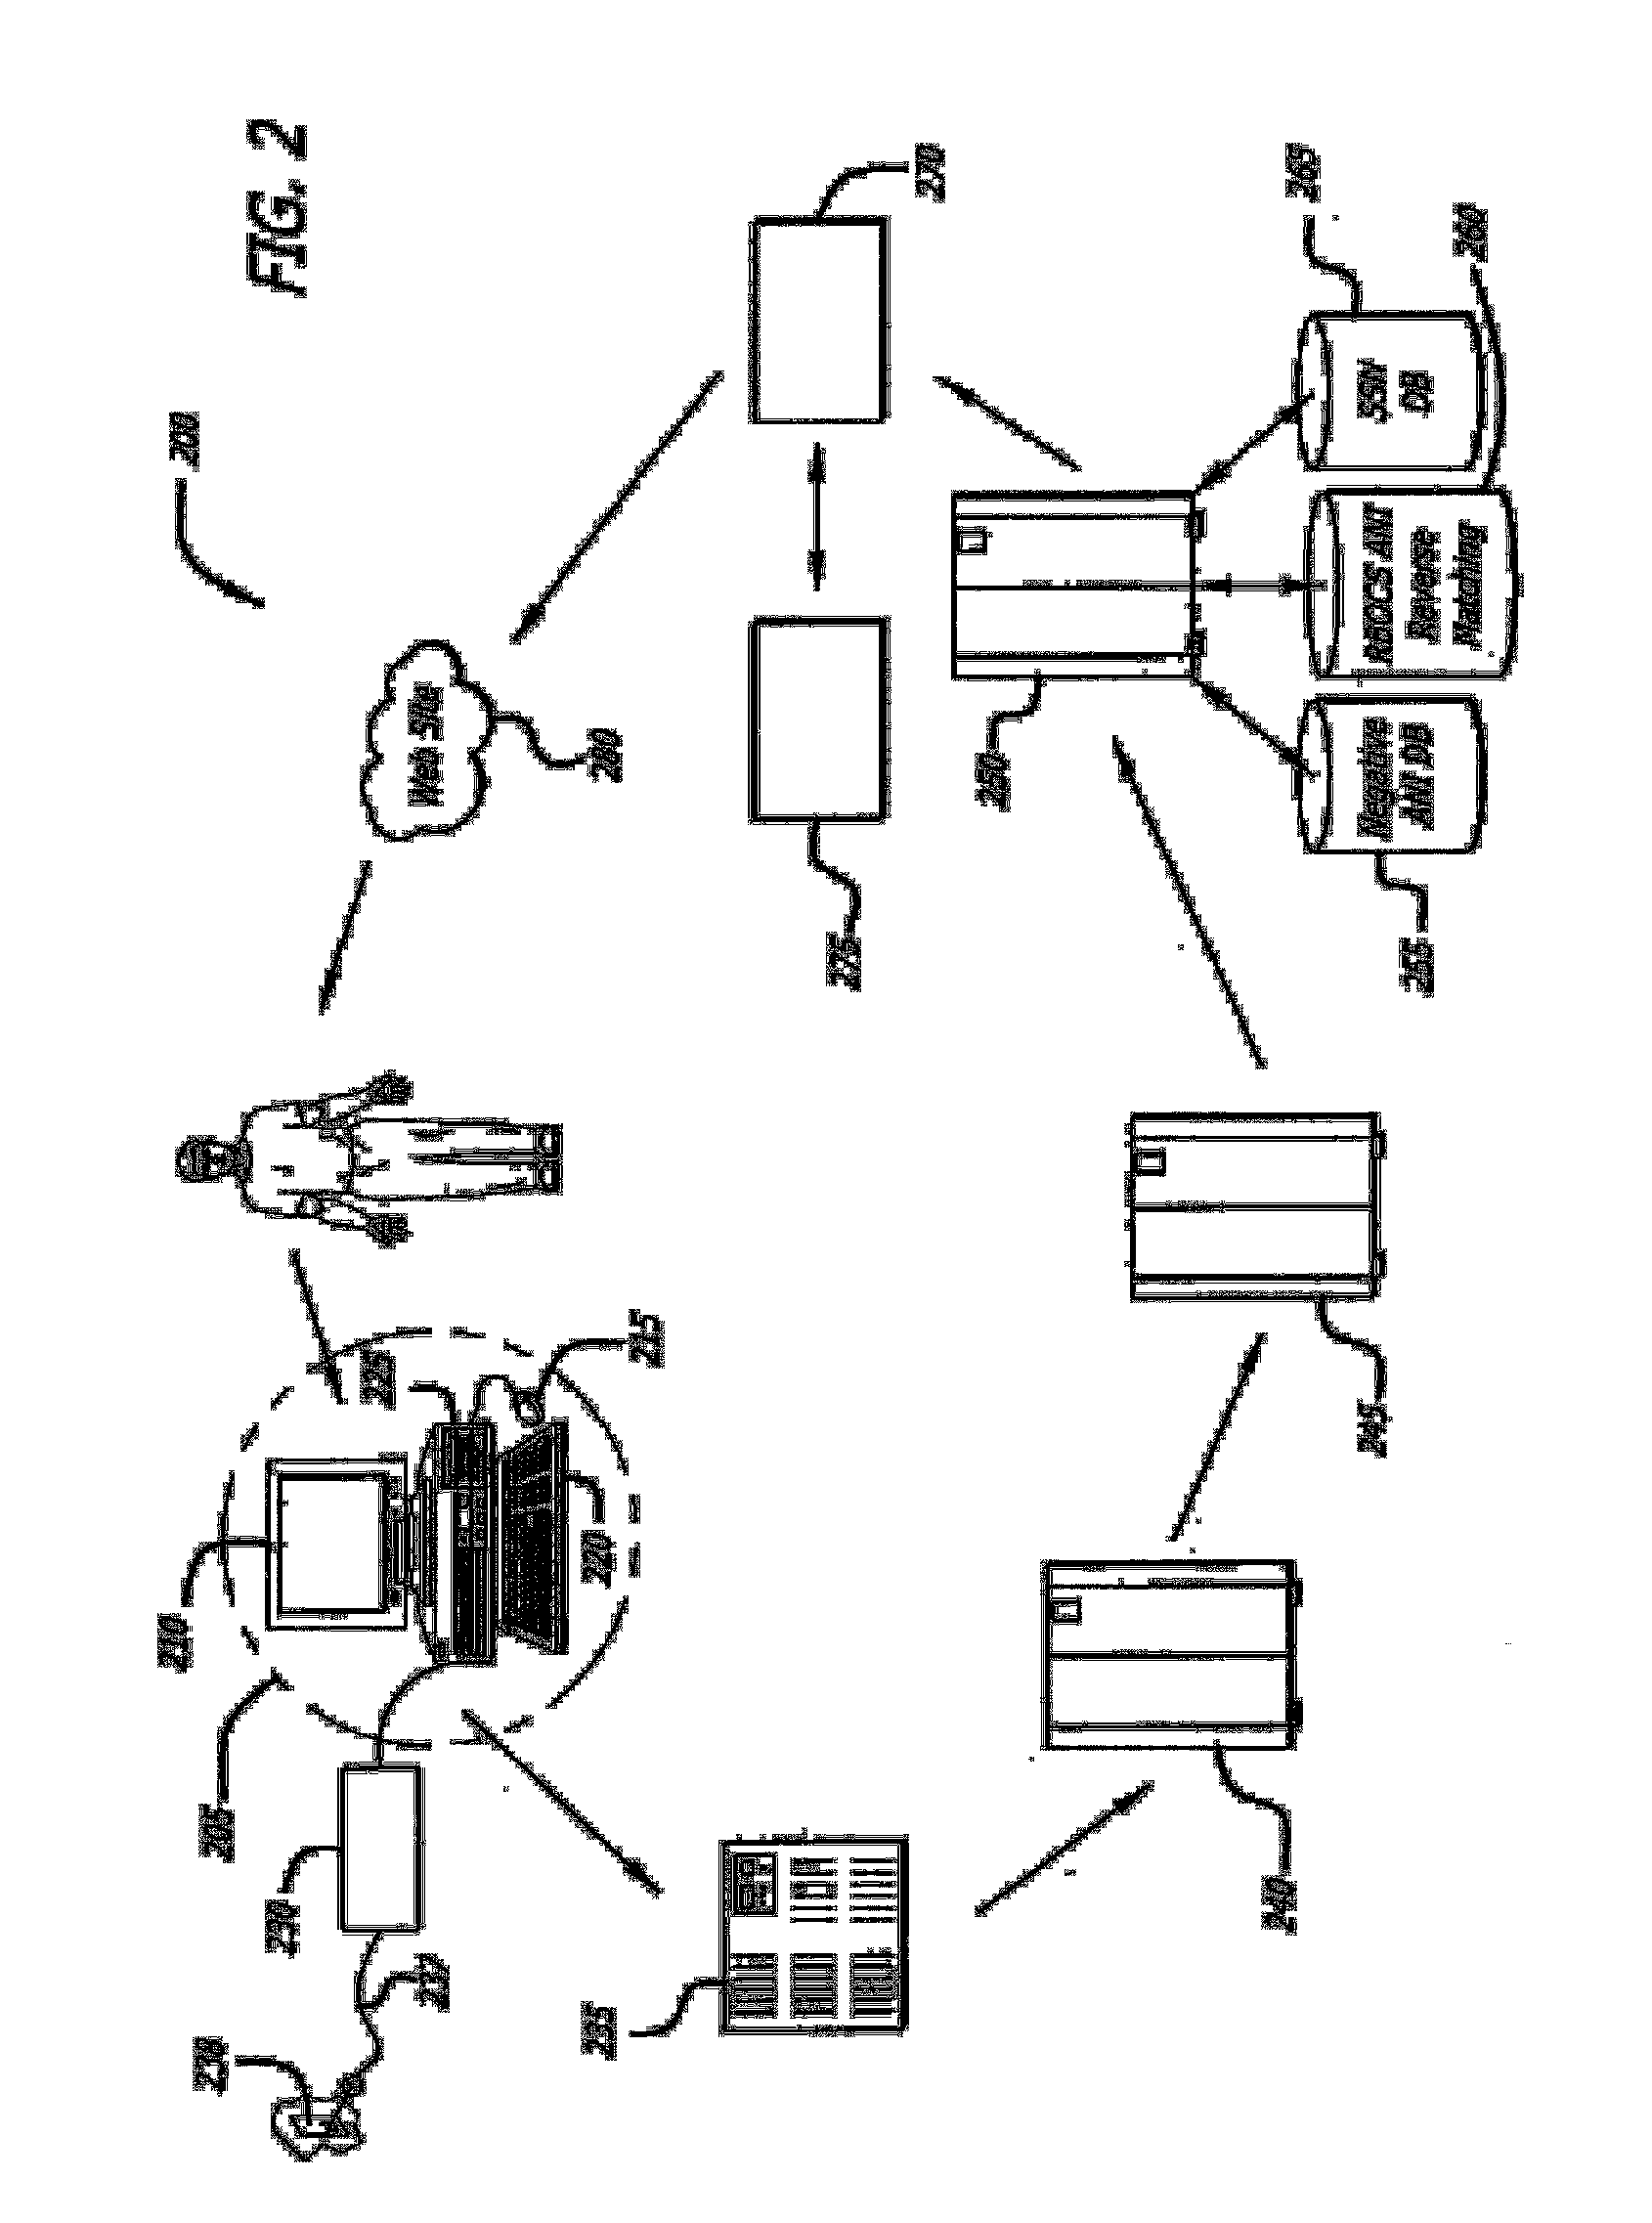 Computer-implemented method and system for managing accounting and billing of transactions over public media such as the internet